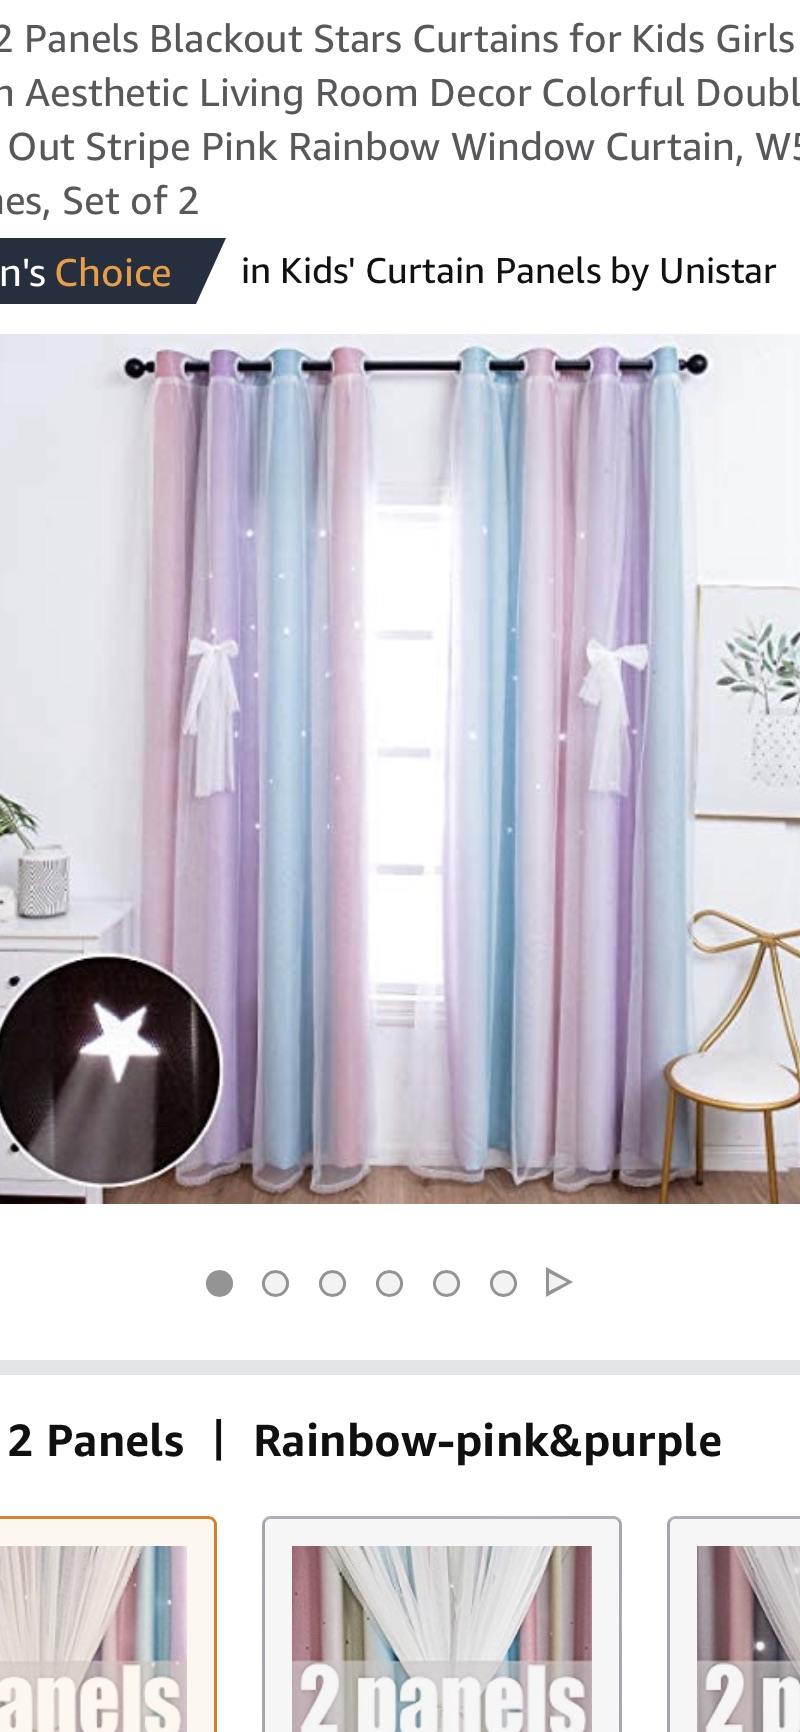 Amazon.com: Unistar 2 Panels Blackout Stars Curtains for Kids Girls Bedroom Aesthetic Living Room Decor Colorful Double Layer Star Cut Out Stripe Pink Rainbow Window Curtain
星星仙女窗簾